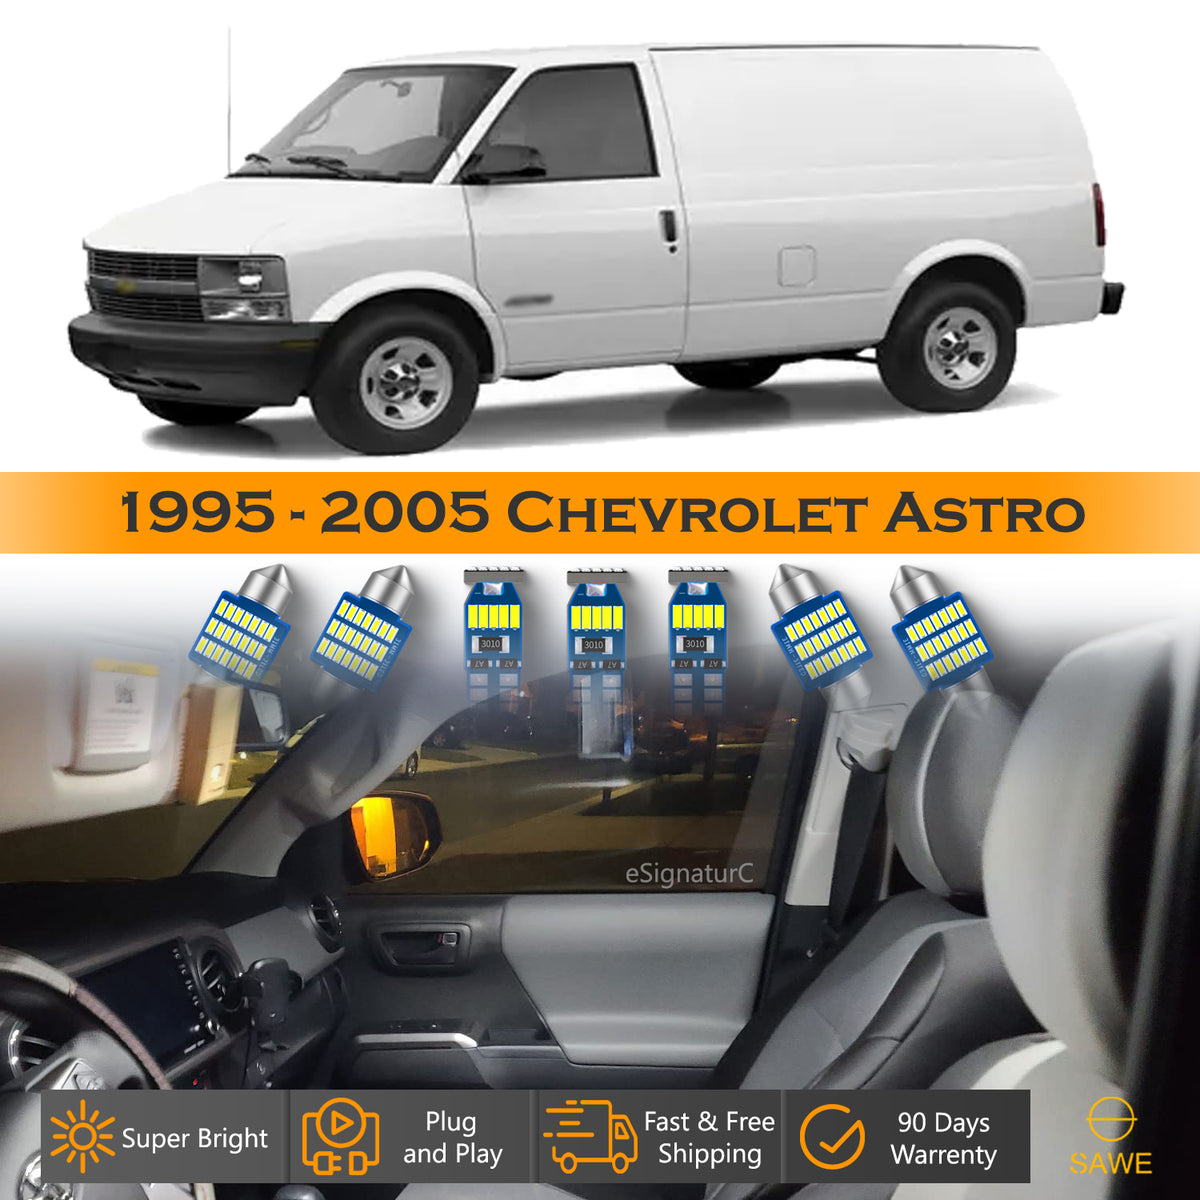 For Chevrolet Astro Interior LED Lights - Dome & Map Lights Package Kit for 1995 - 2005 - White